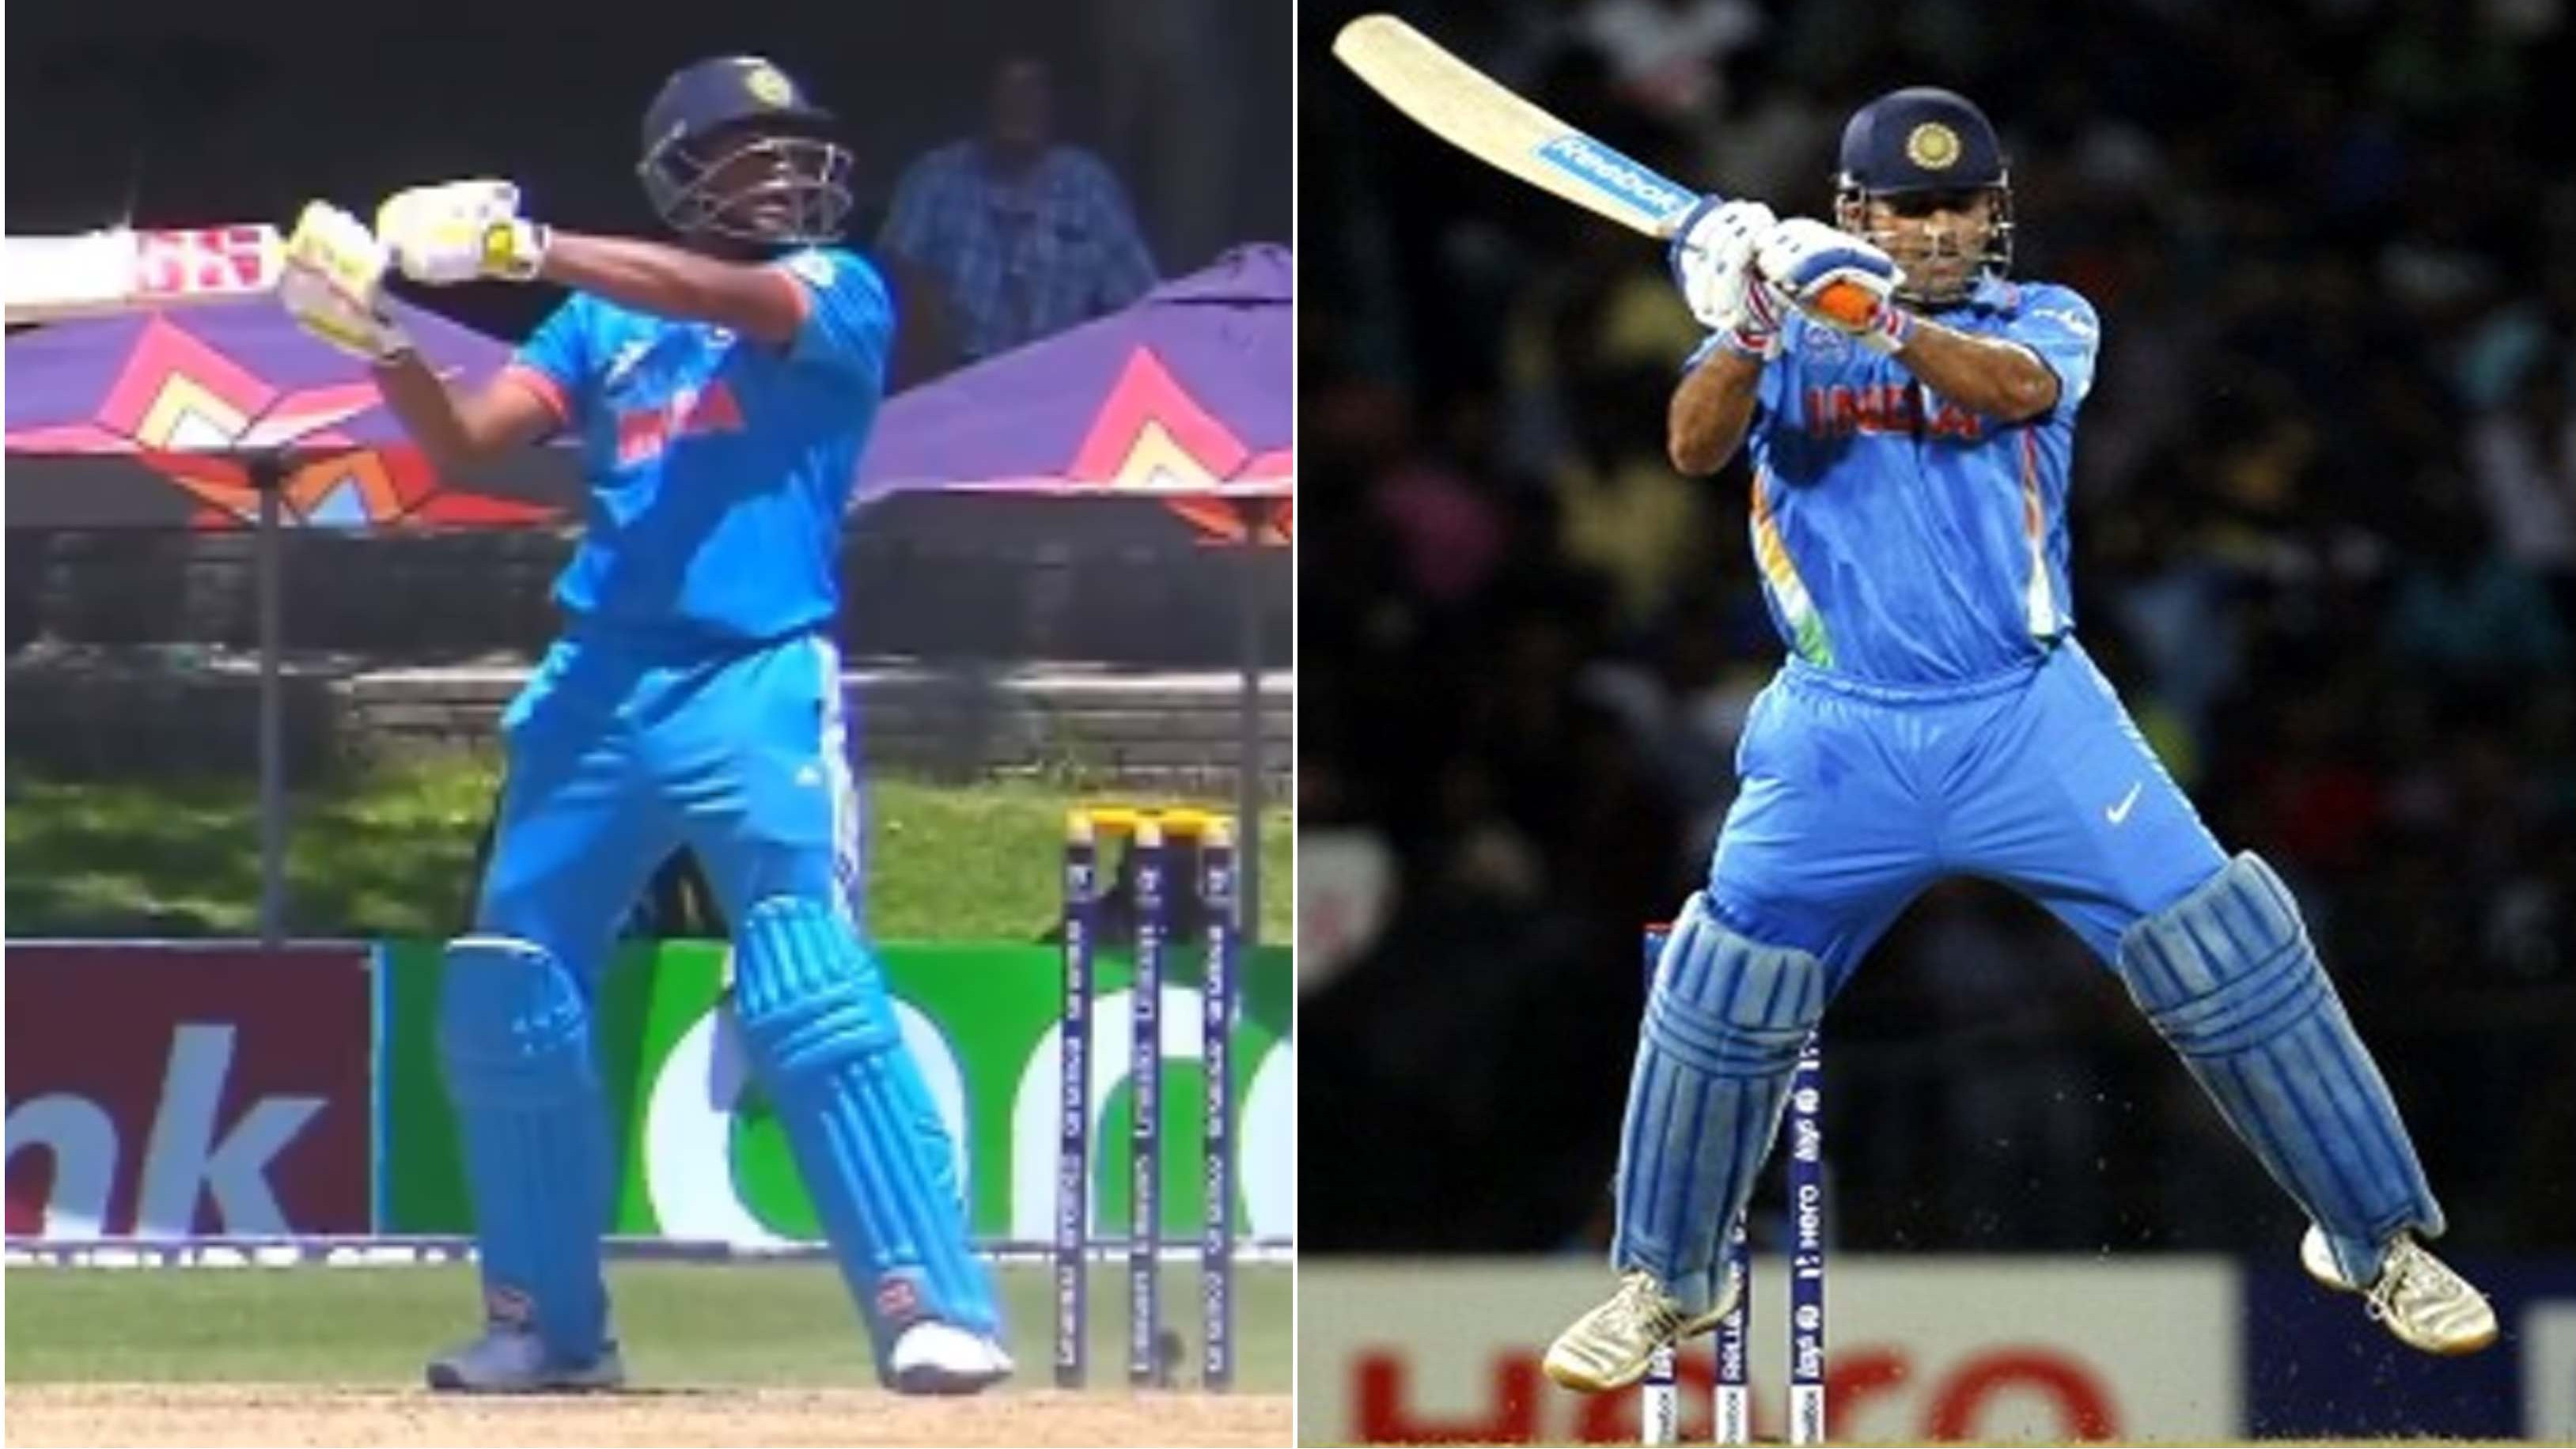 WATCH: Musheer Khan replicates MS Dhoni's iconic ‘Helicopter’ shot for a six against New Zealand in U-19 World Cup